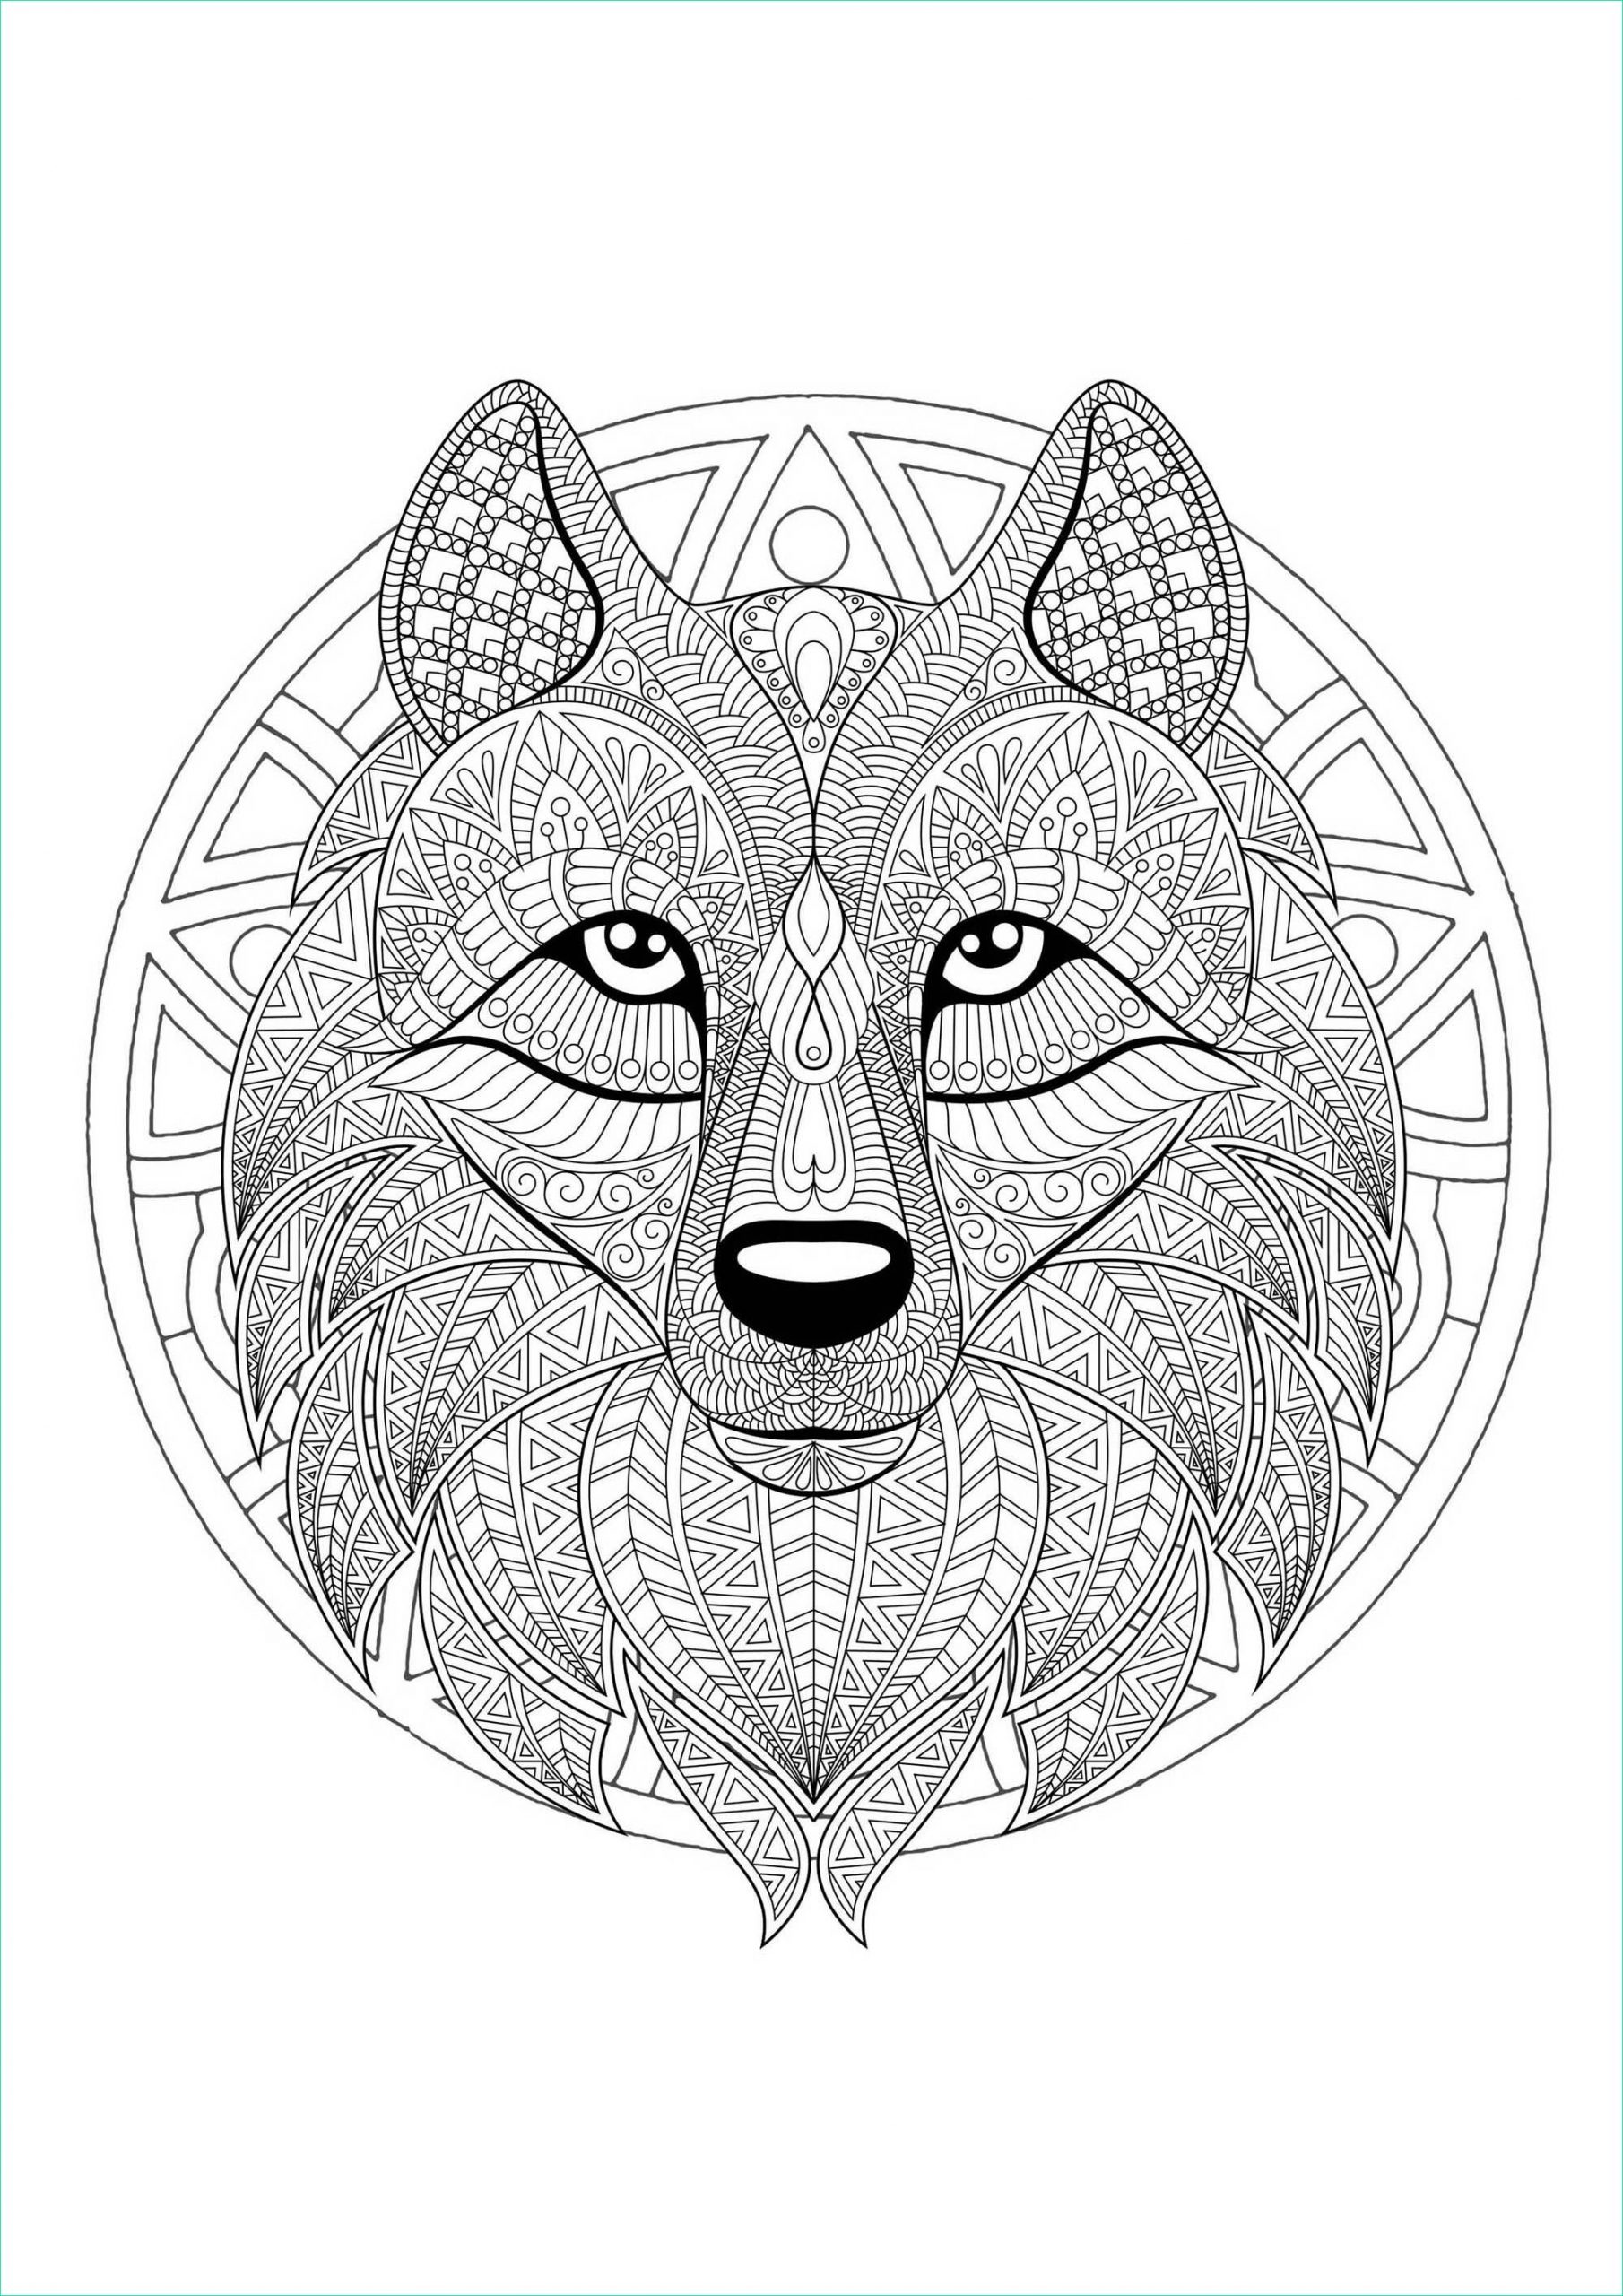 Coloriage Mandala Luxe Photos Mandala with Geometric Patterns and Wolf Head Full Of